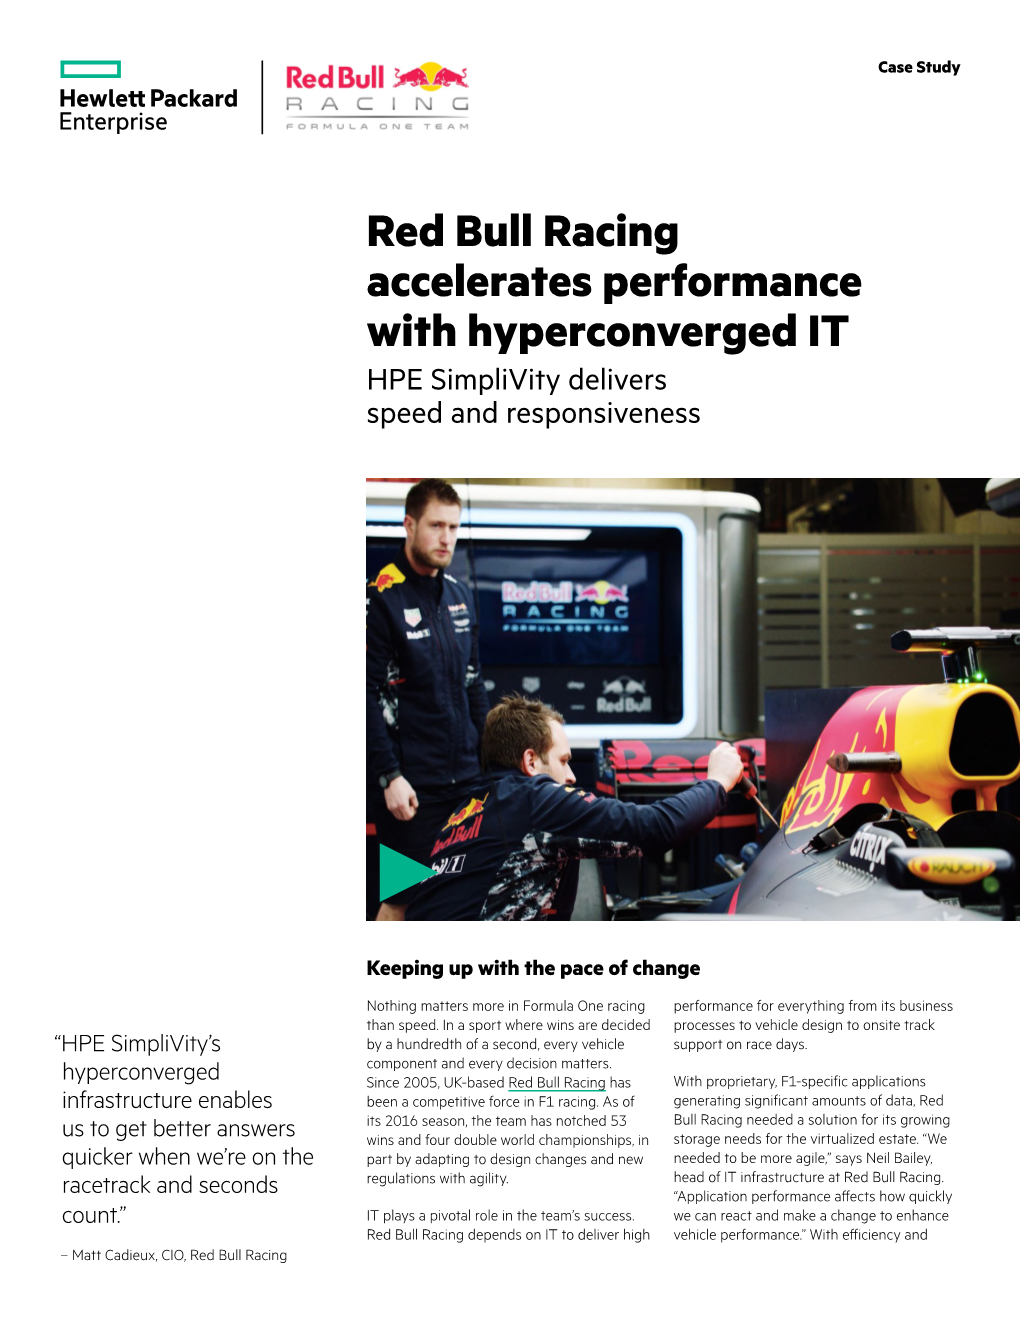 Red Bull Racing Accelerates Performance with Hyperconverged IT HPE Simplivity Delivers Speed and Responsiveness